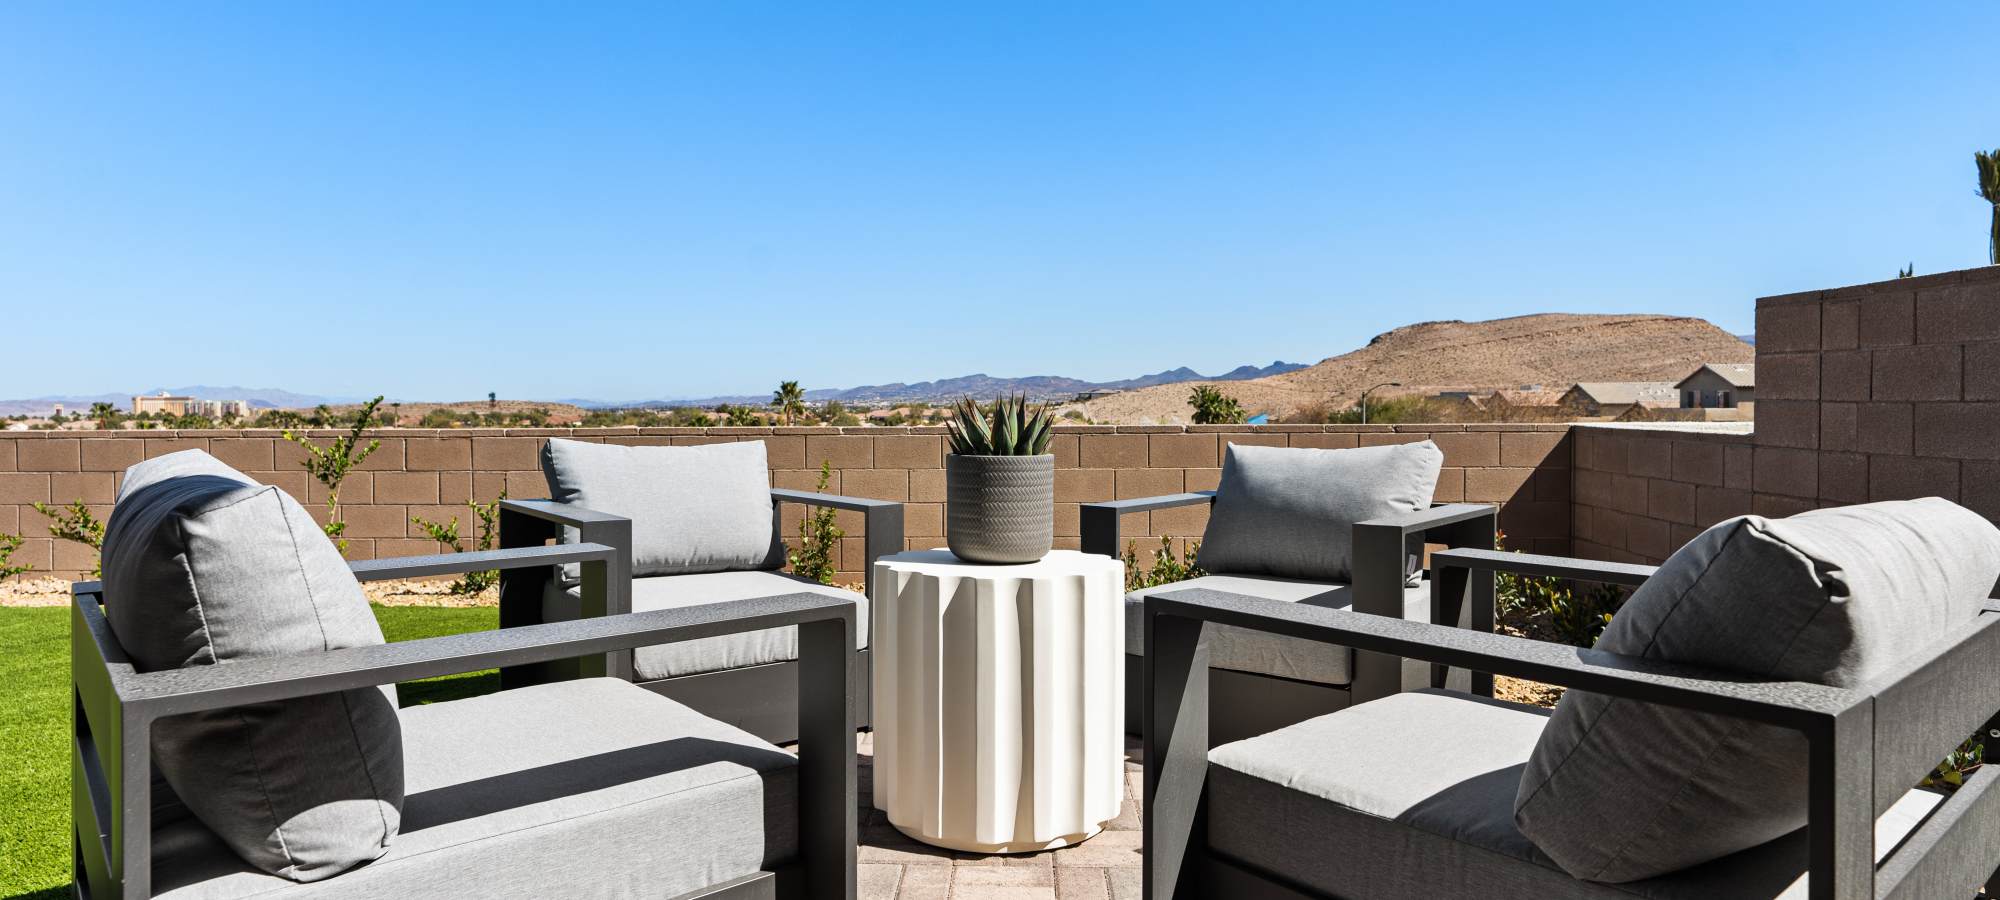 Outdoor spaces at Seneca at Southern Highlands in Las Vegas, Nevada